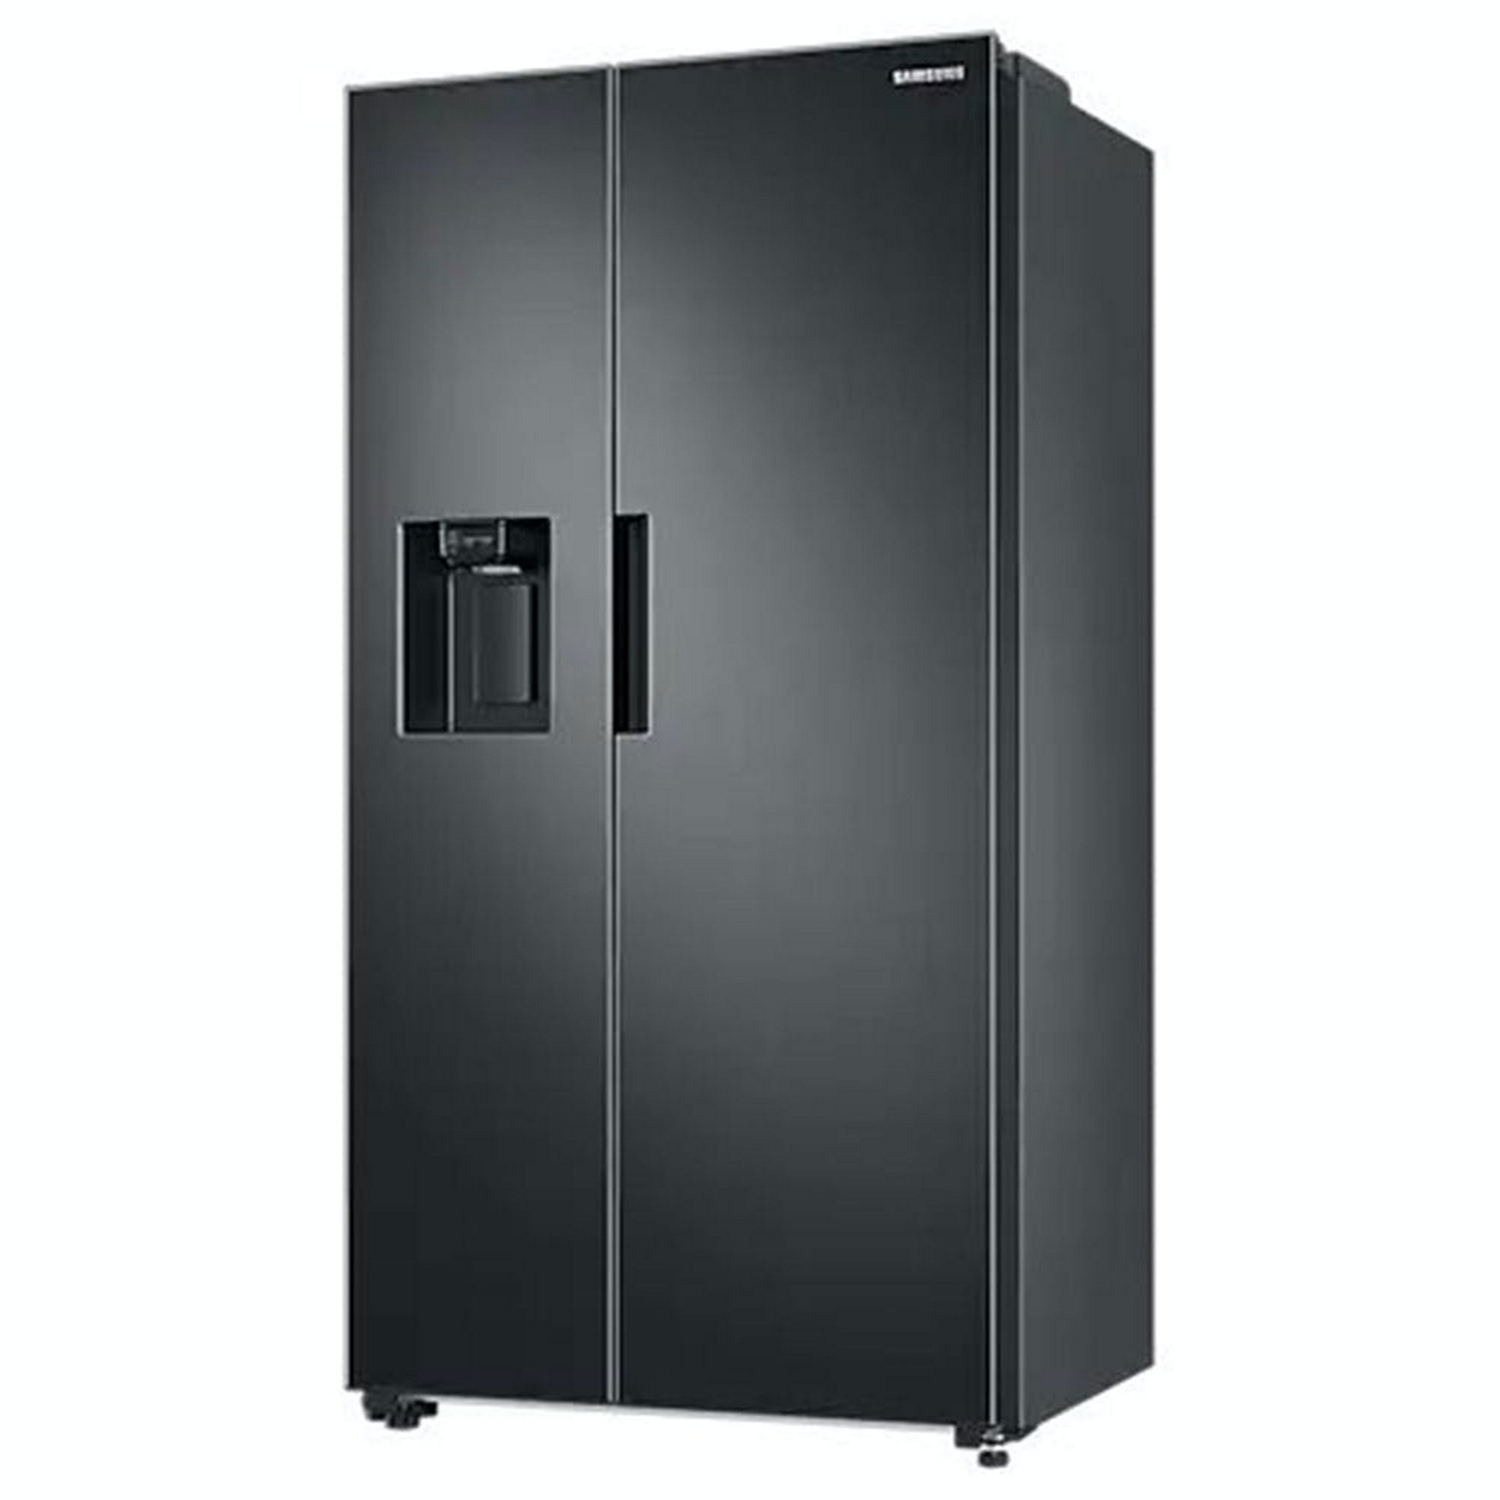 RS8000 7 Series American Style Fridge Freezer With SpaceMax™ Technology